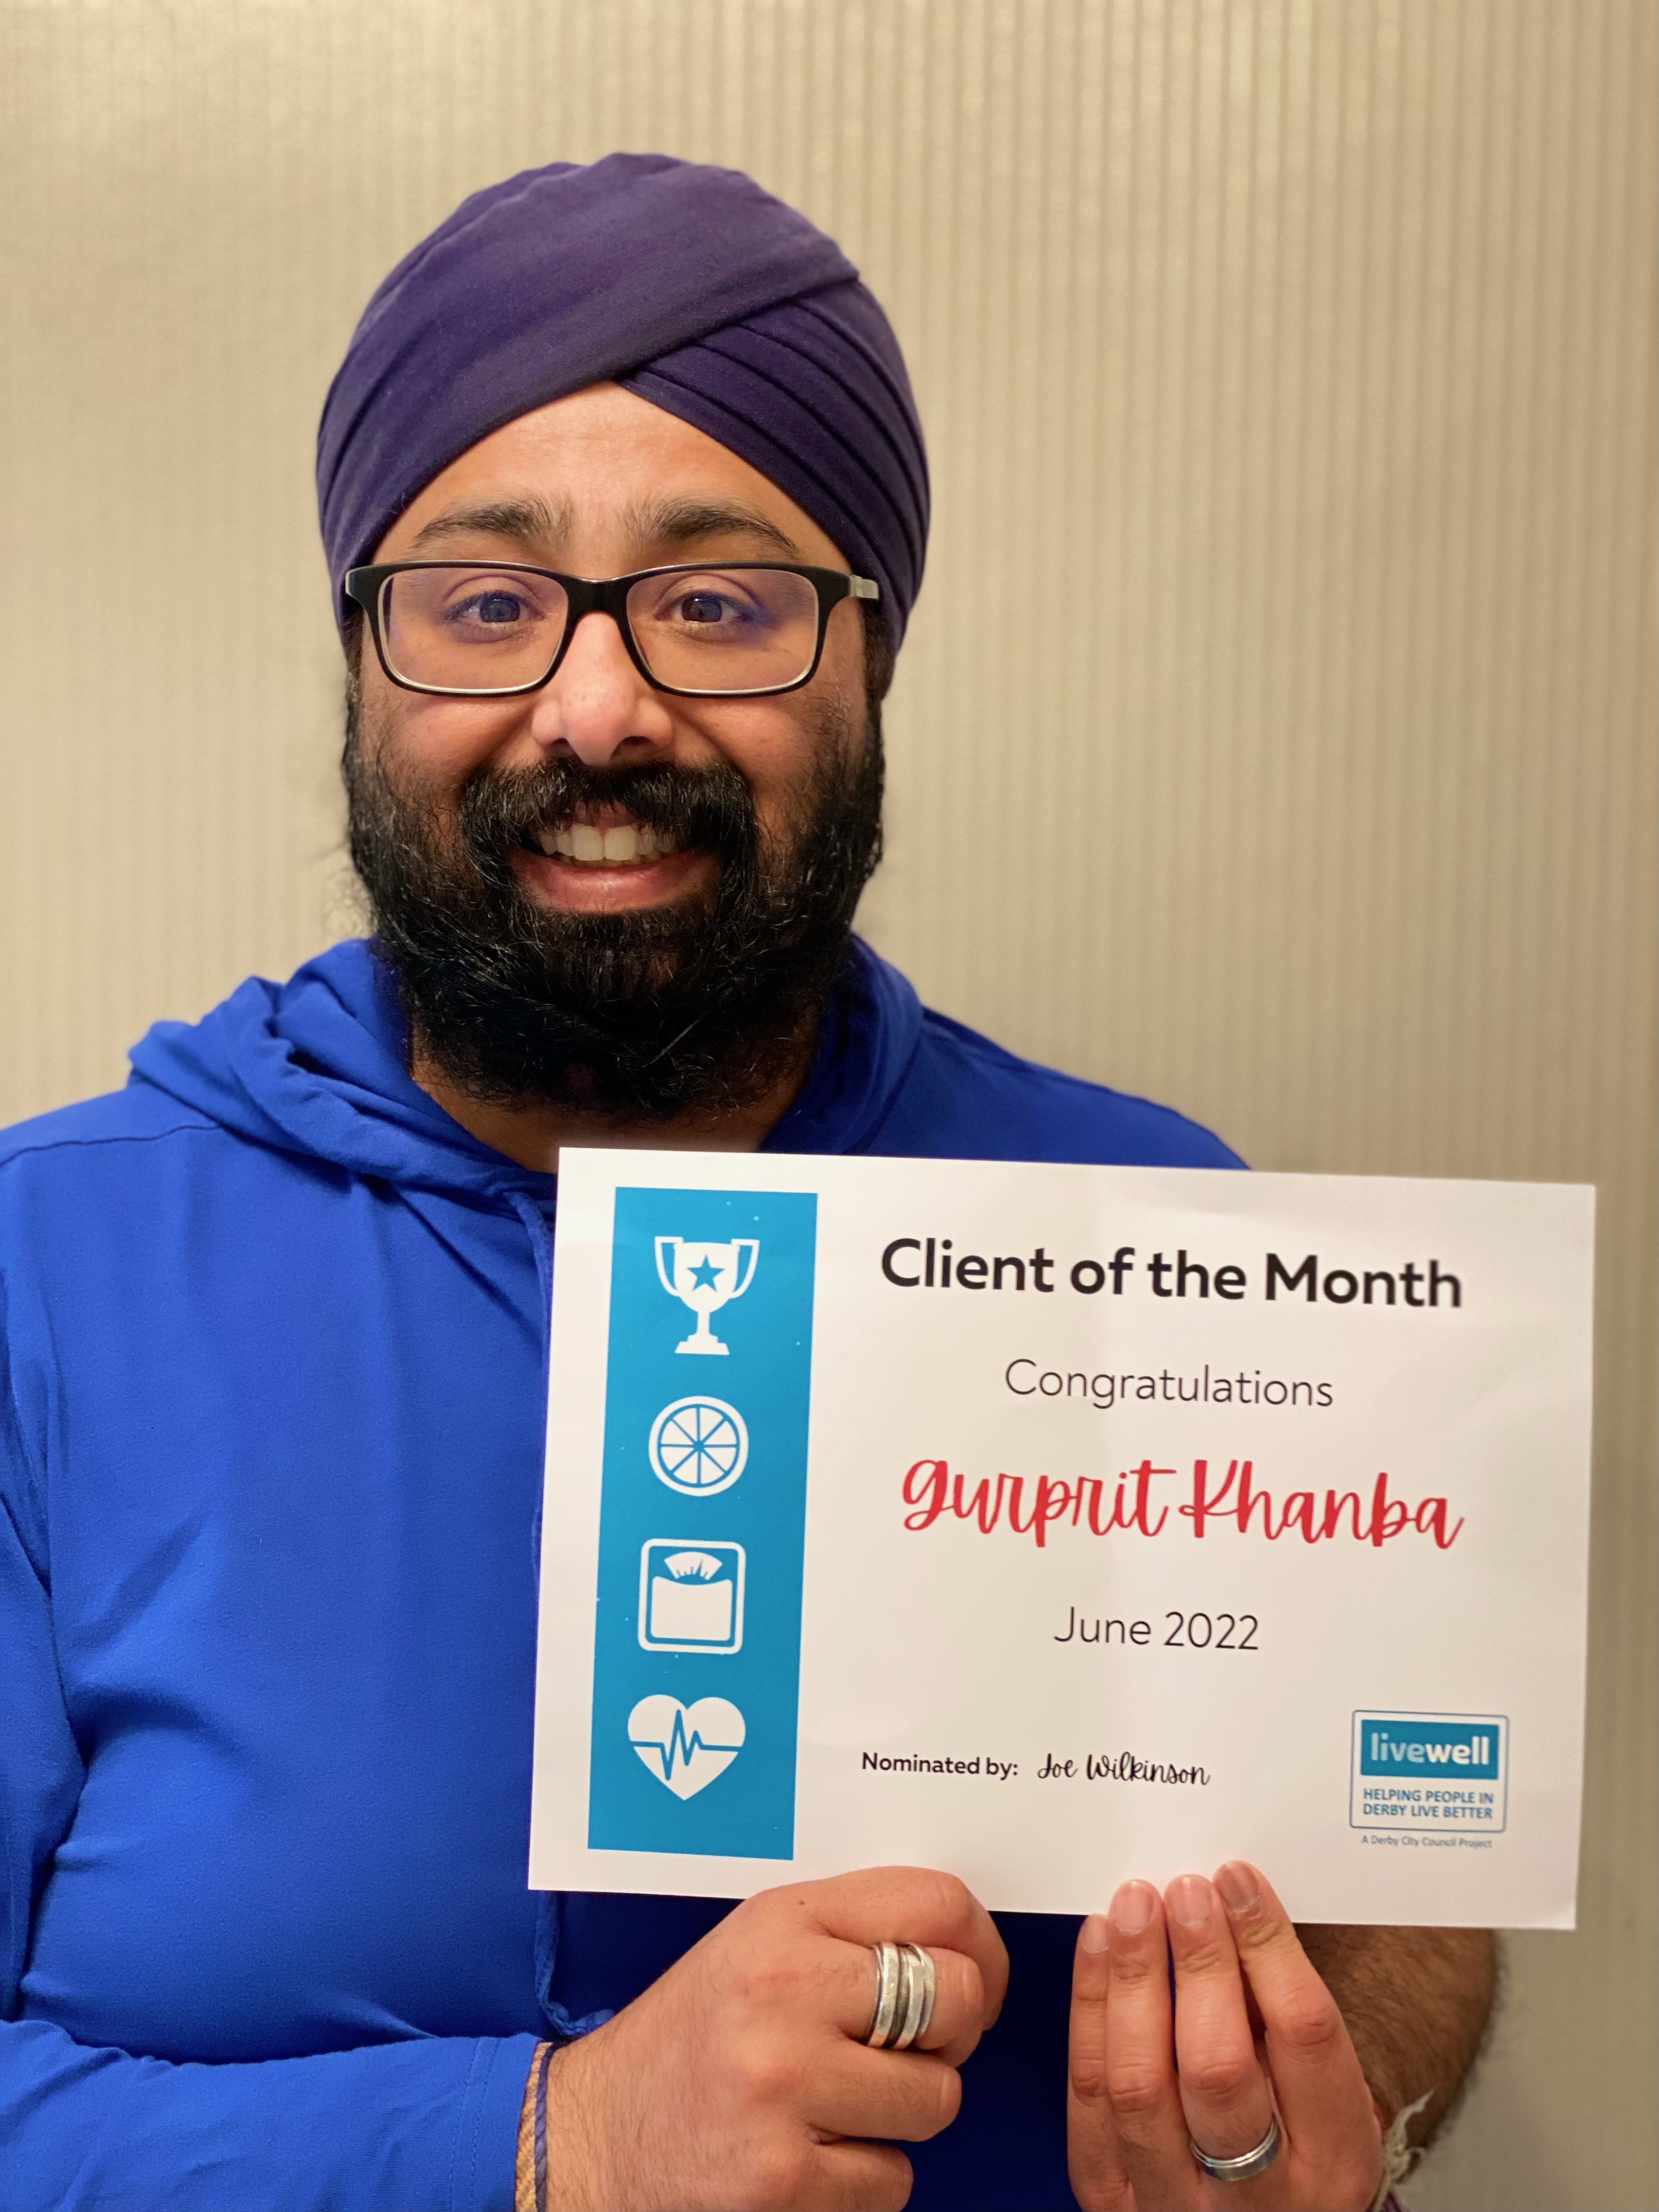 Client of the month - Gurprit